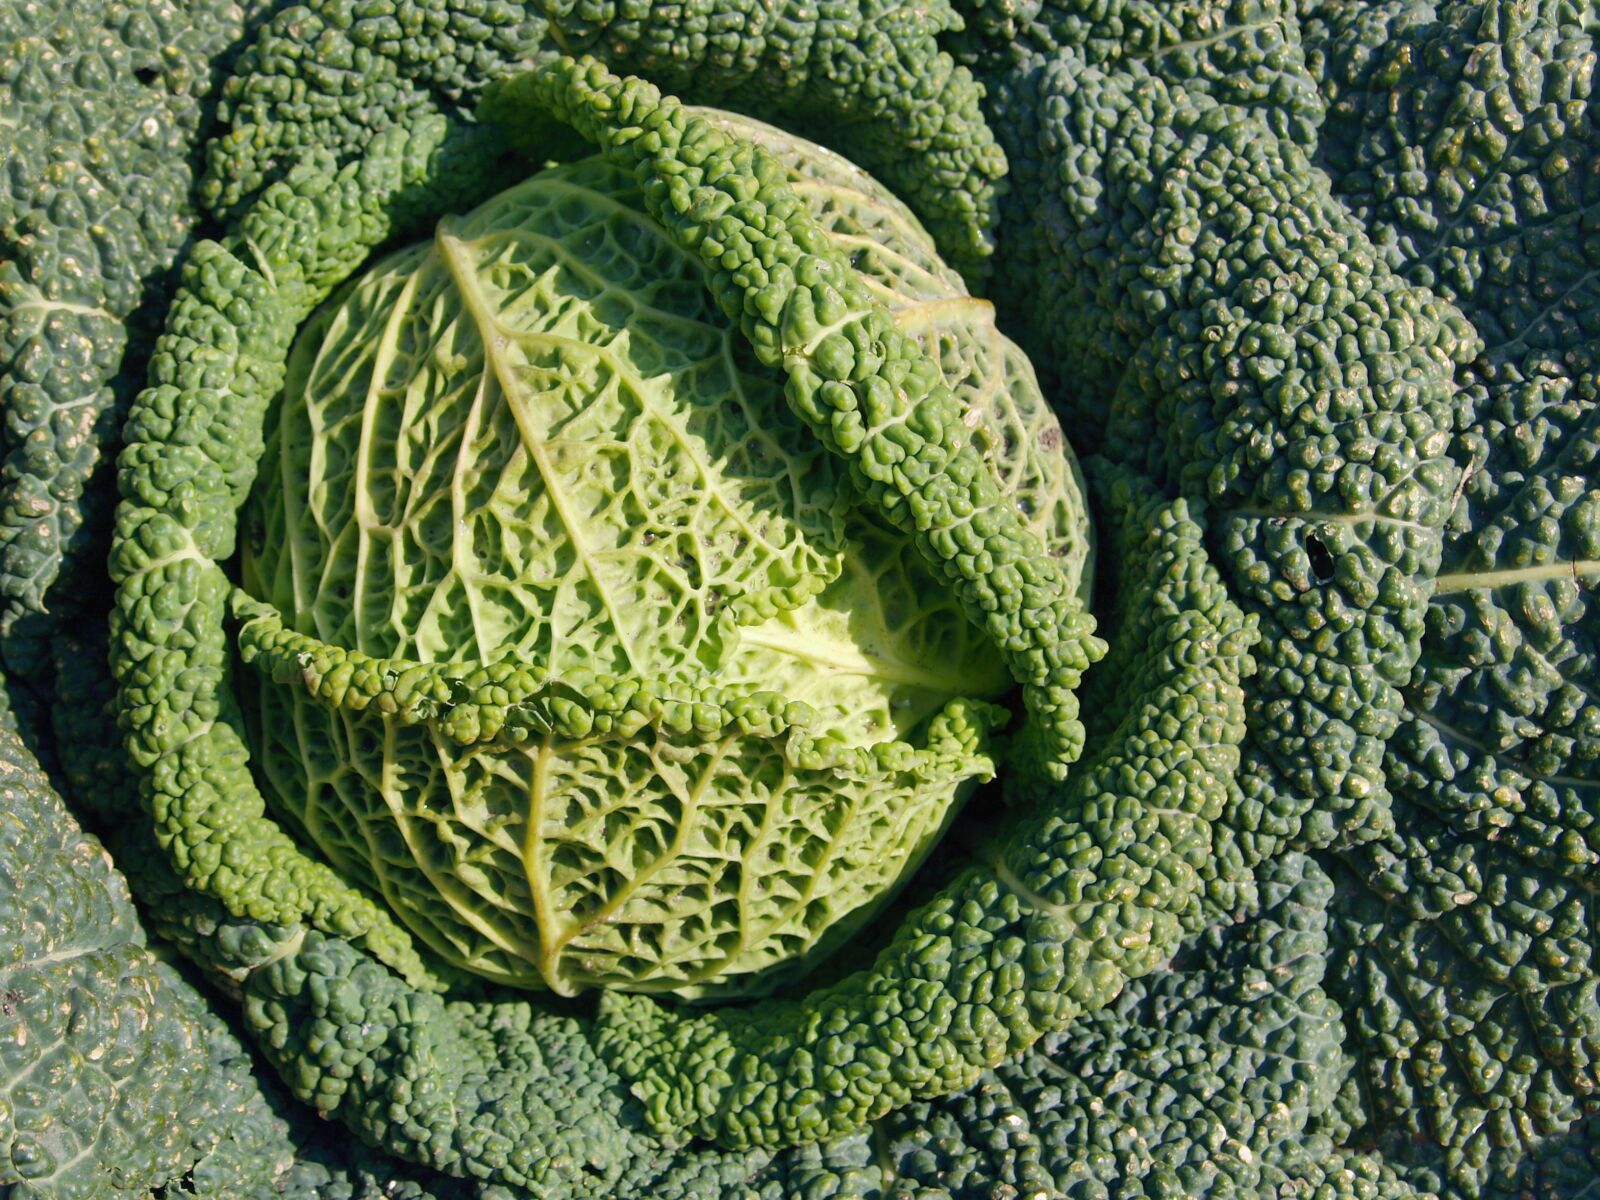 Olympus E-330 (EVOLT E-330) sample photo. Cabbage, green, vegetables photography